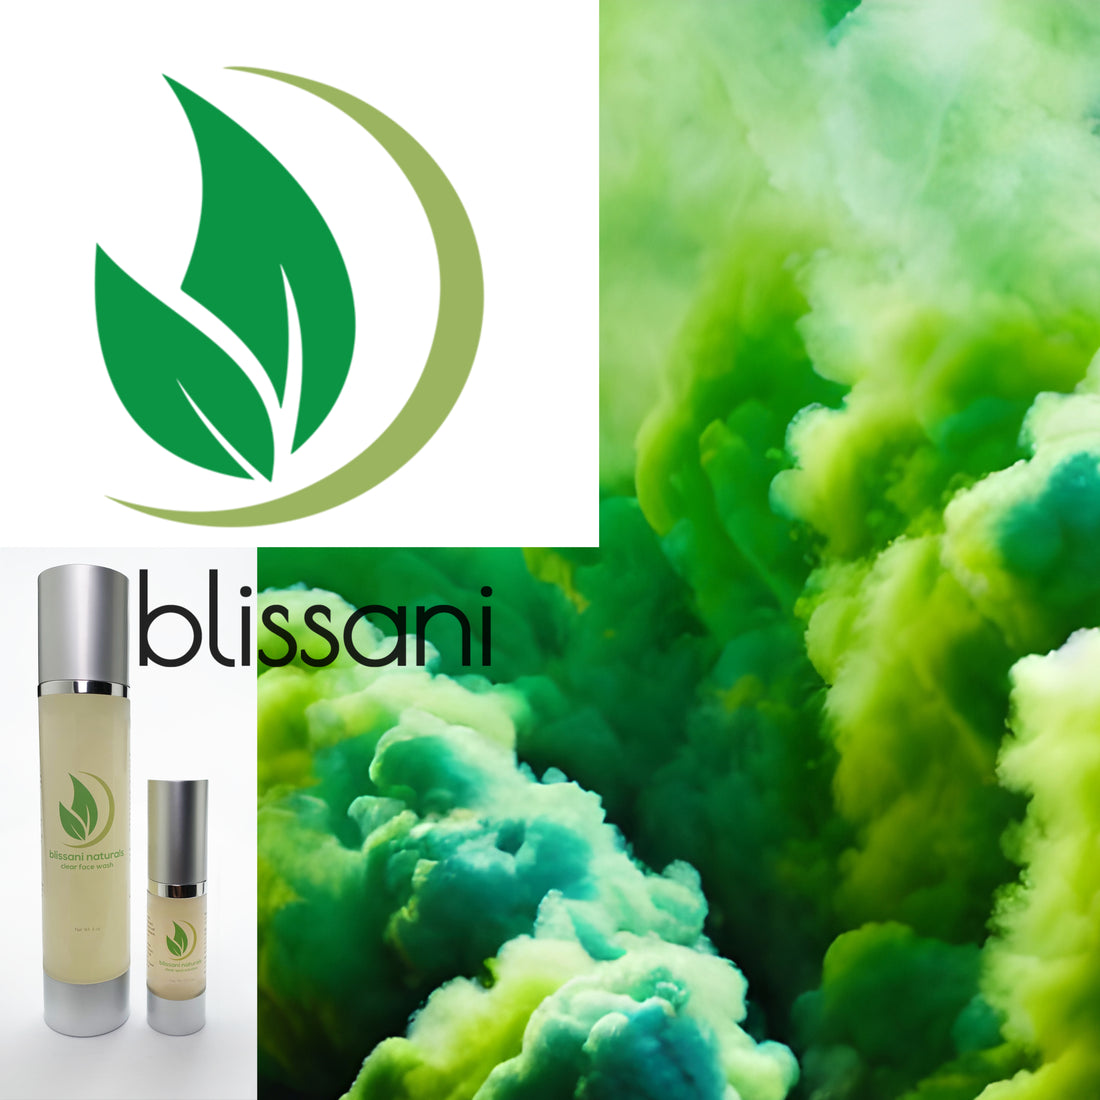 the blissani logo and wordmark with blissai products next to a cloud of toxic gas